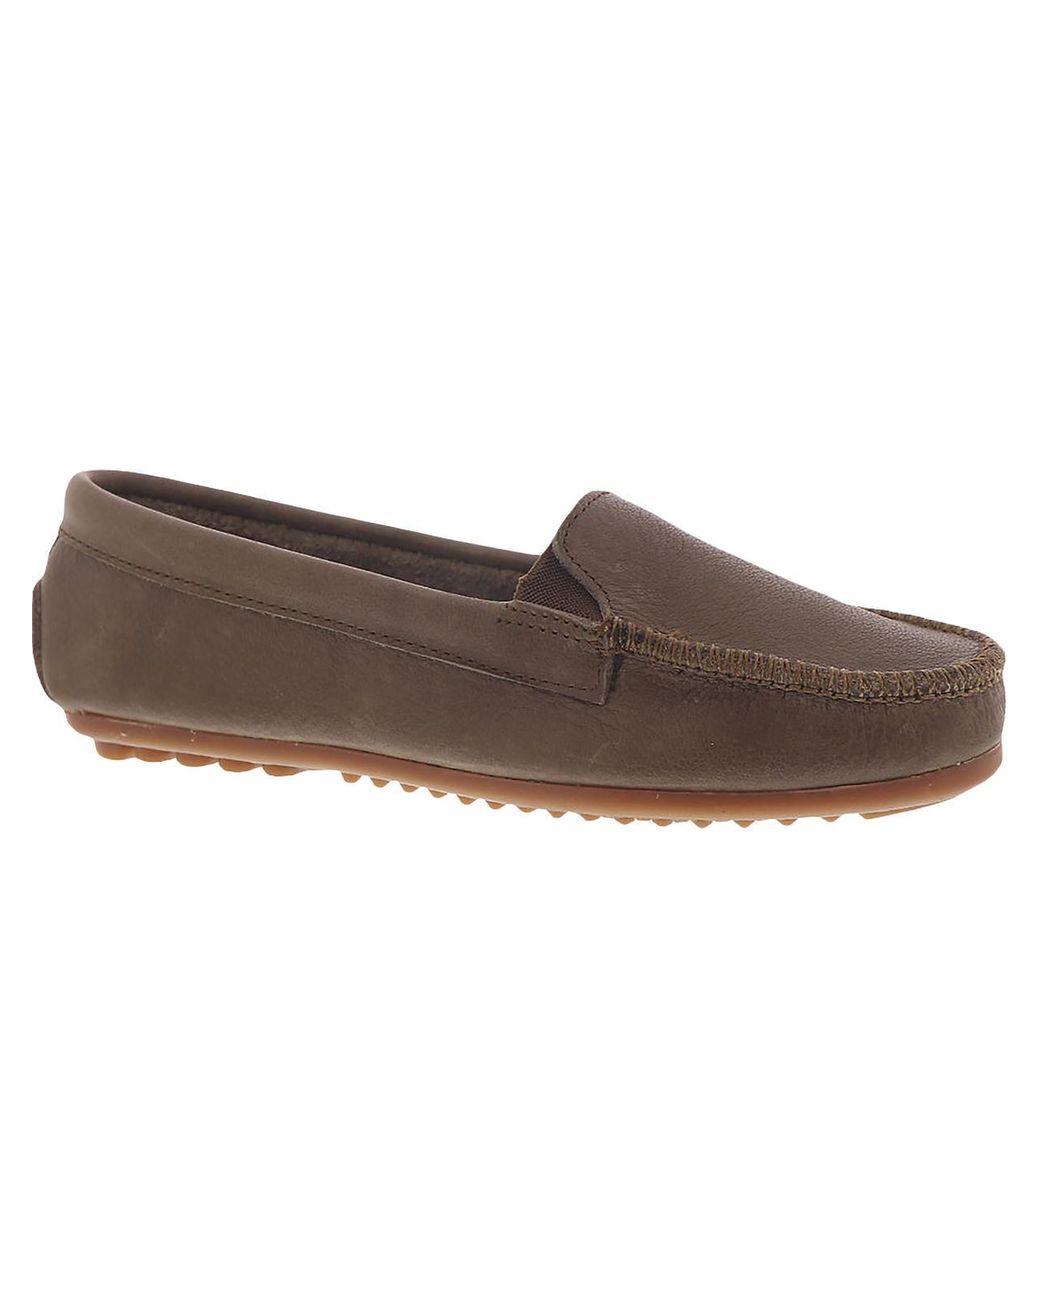 Minnetonka Imperial Faux Leather Slip On Loafers in Brown | Lyst